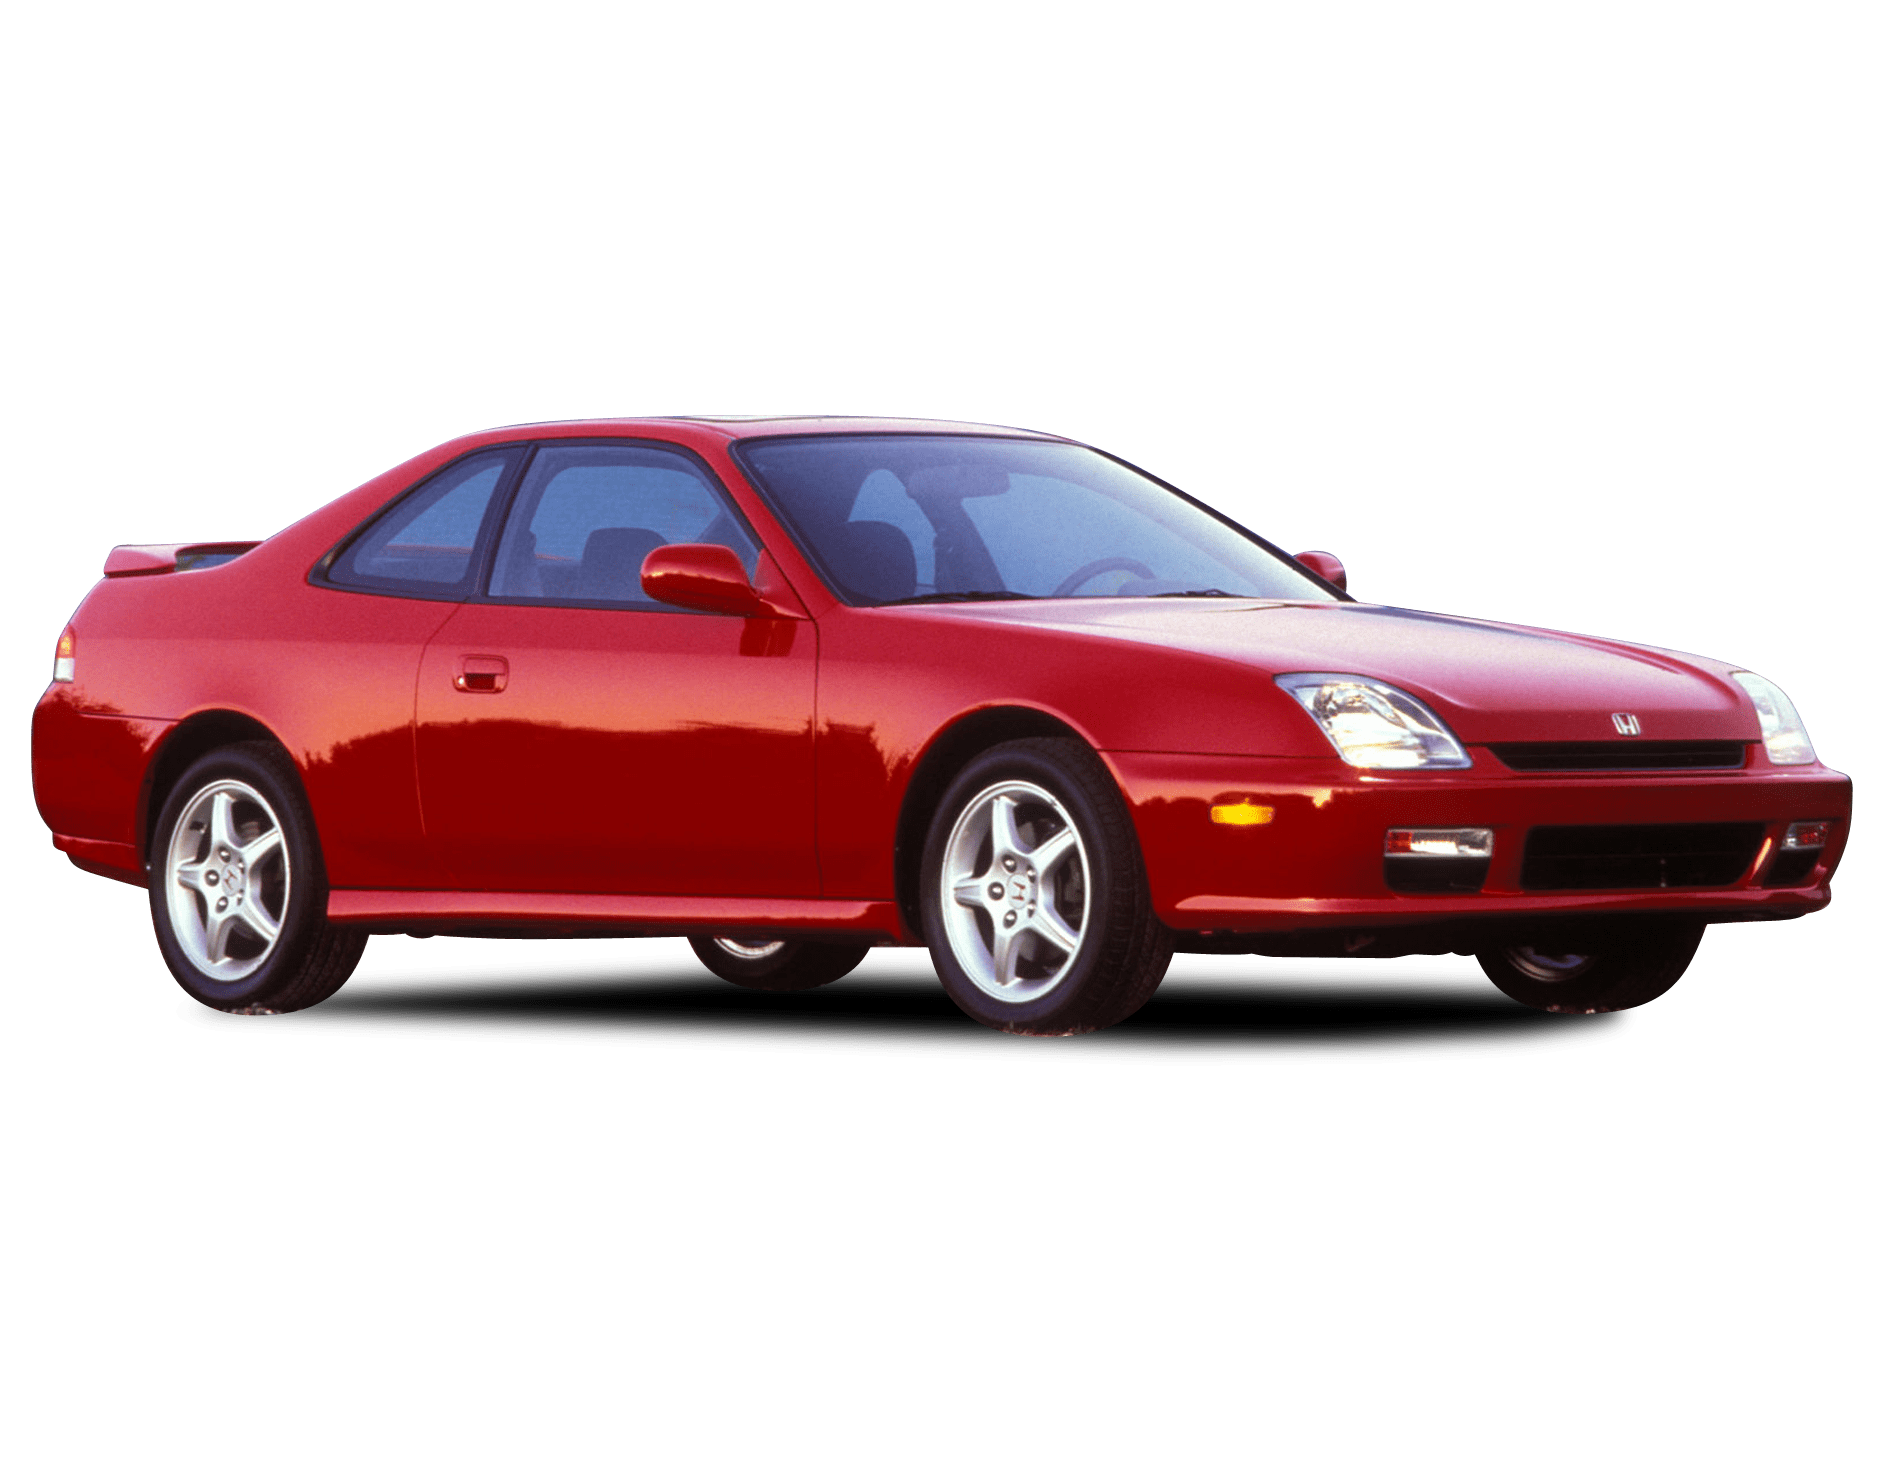 Honda Prelude Review, For Sale, Specs, Models & News in Australia |  CarsGuide